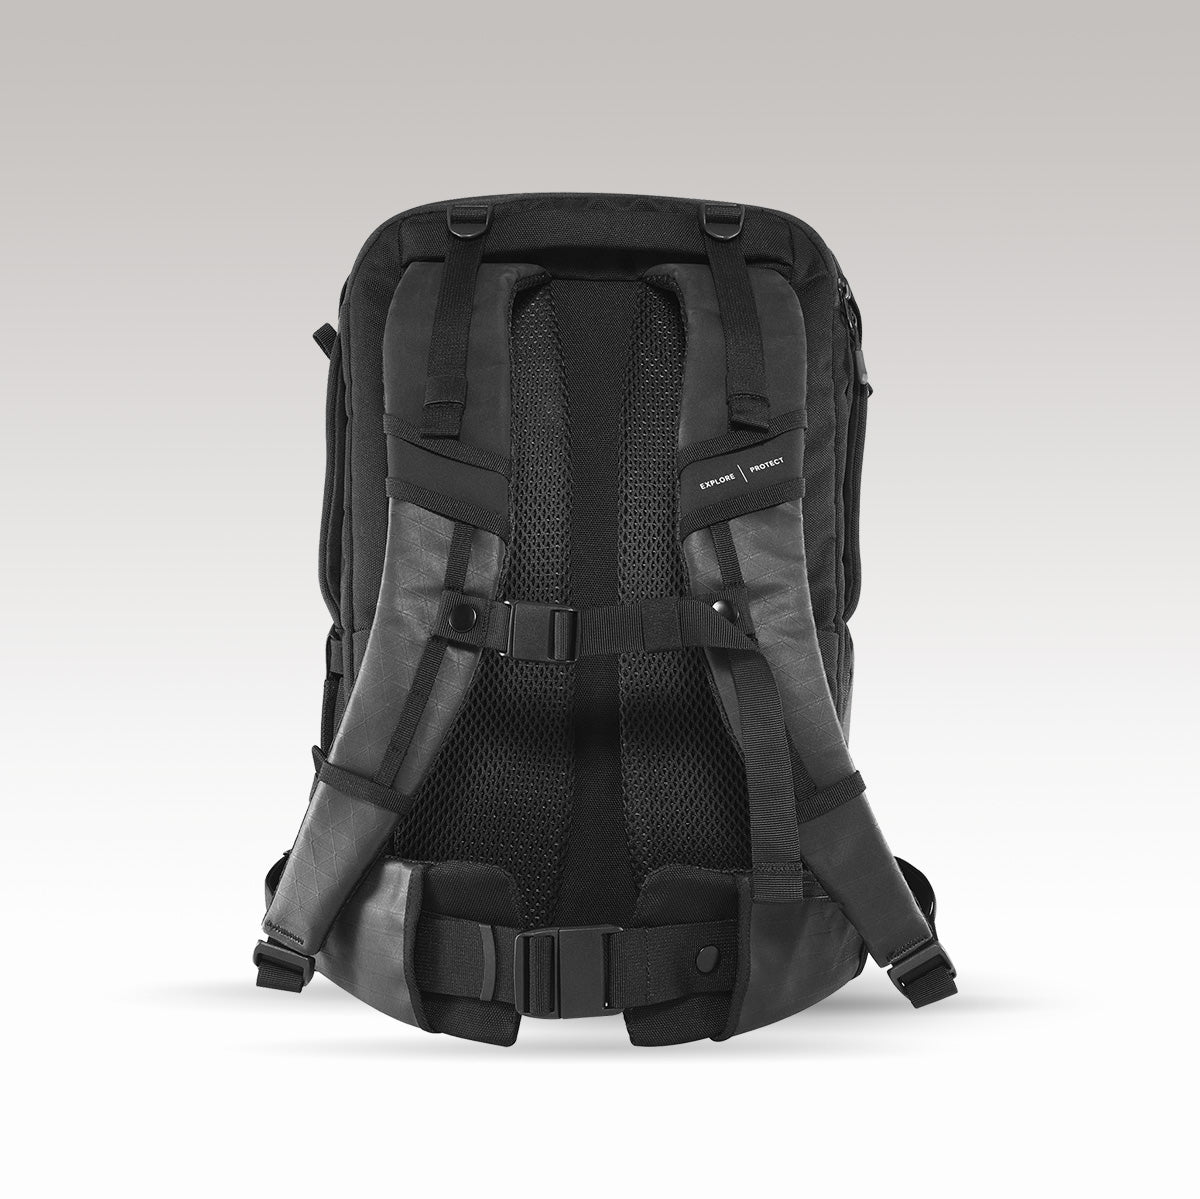 The Detachable Waist Belt on the 24L Backpack